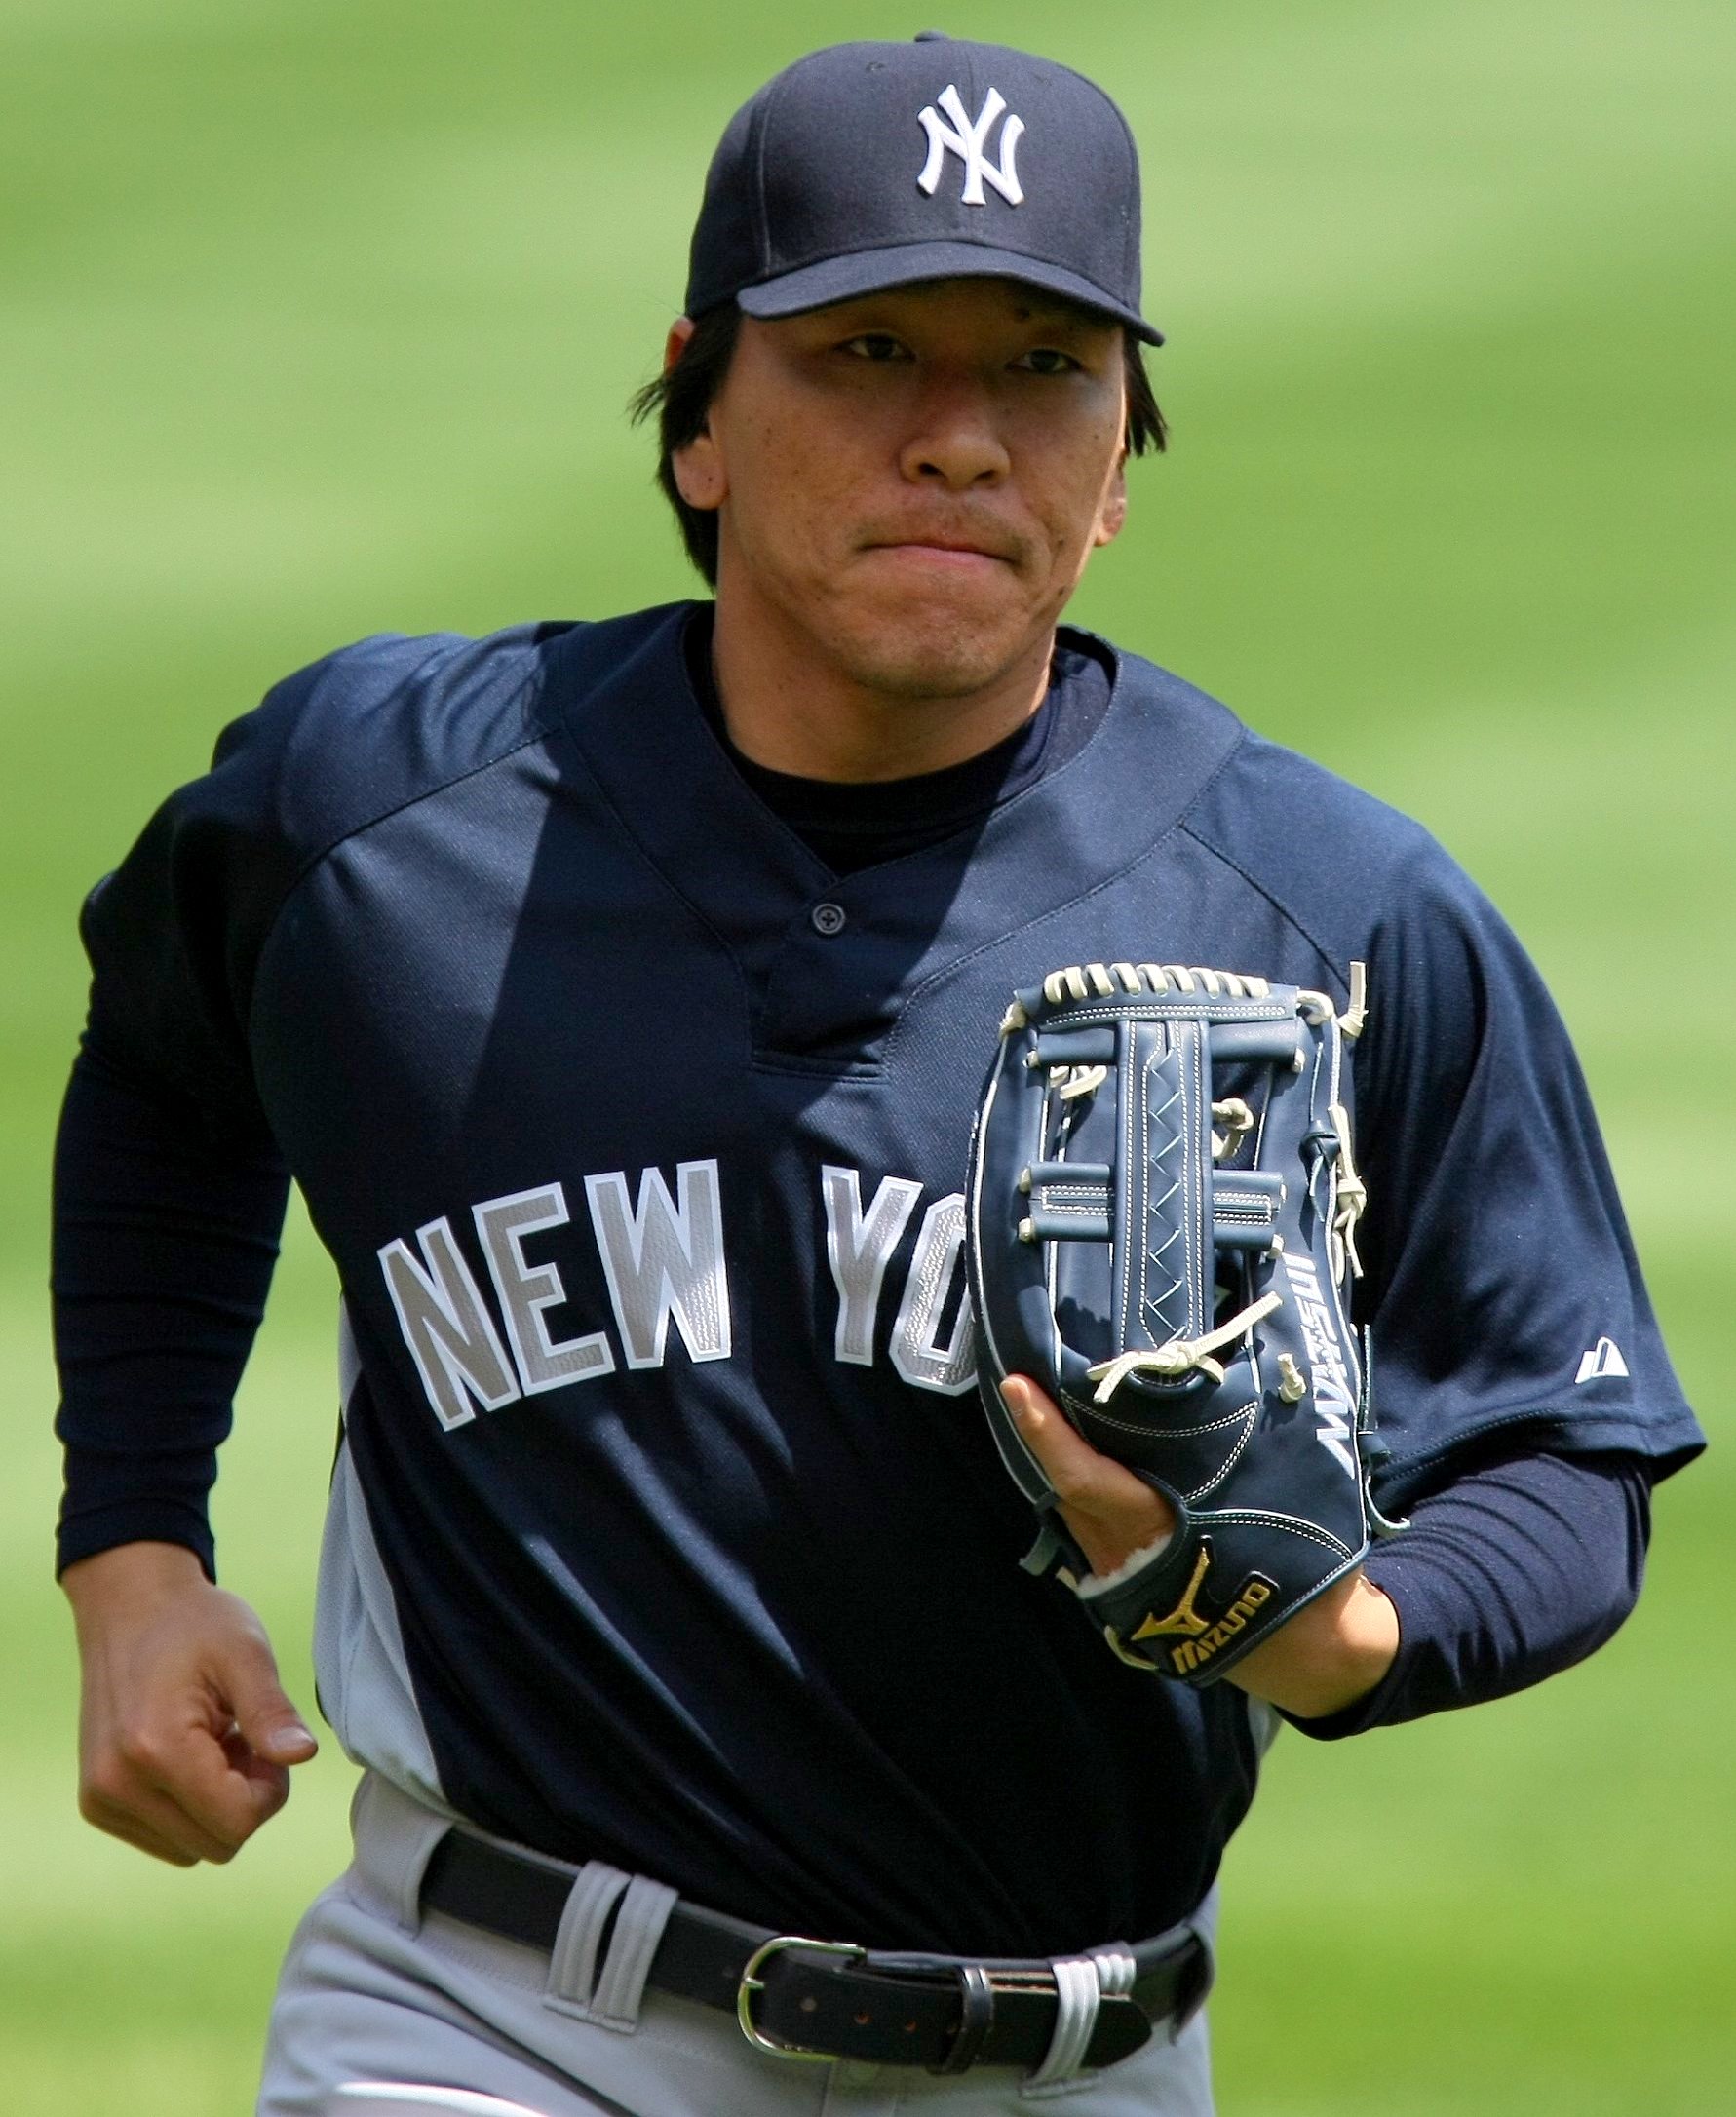 In 2004 the Yankees played an exhibition game in Tokyo against Hideki  Matsui's former team the Yomiuri Giants. This was Matsui's first game…